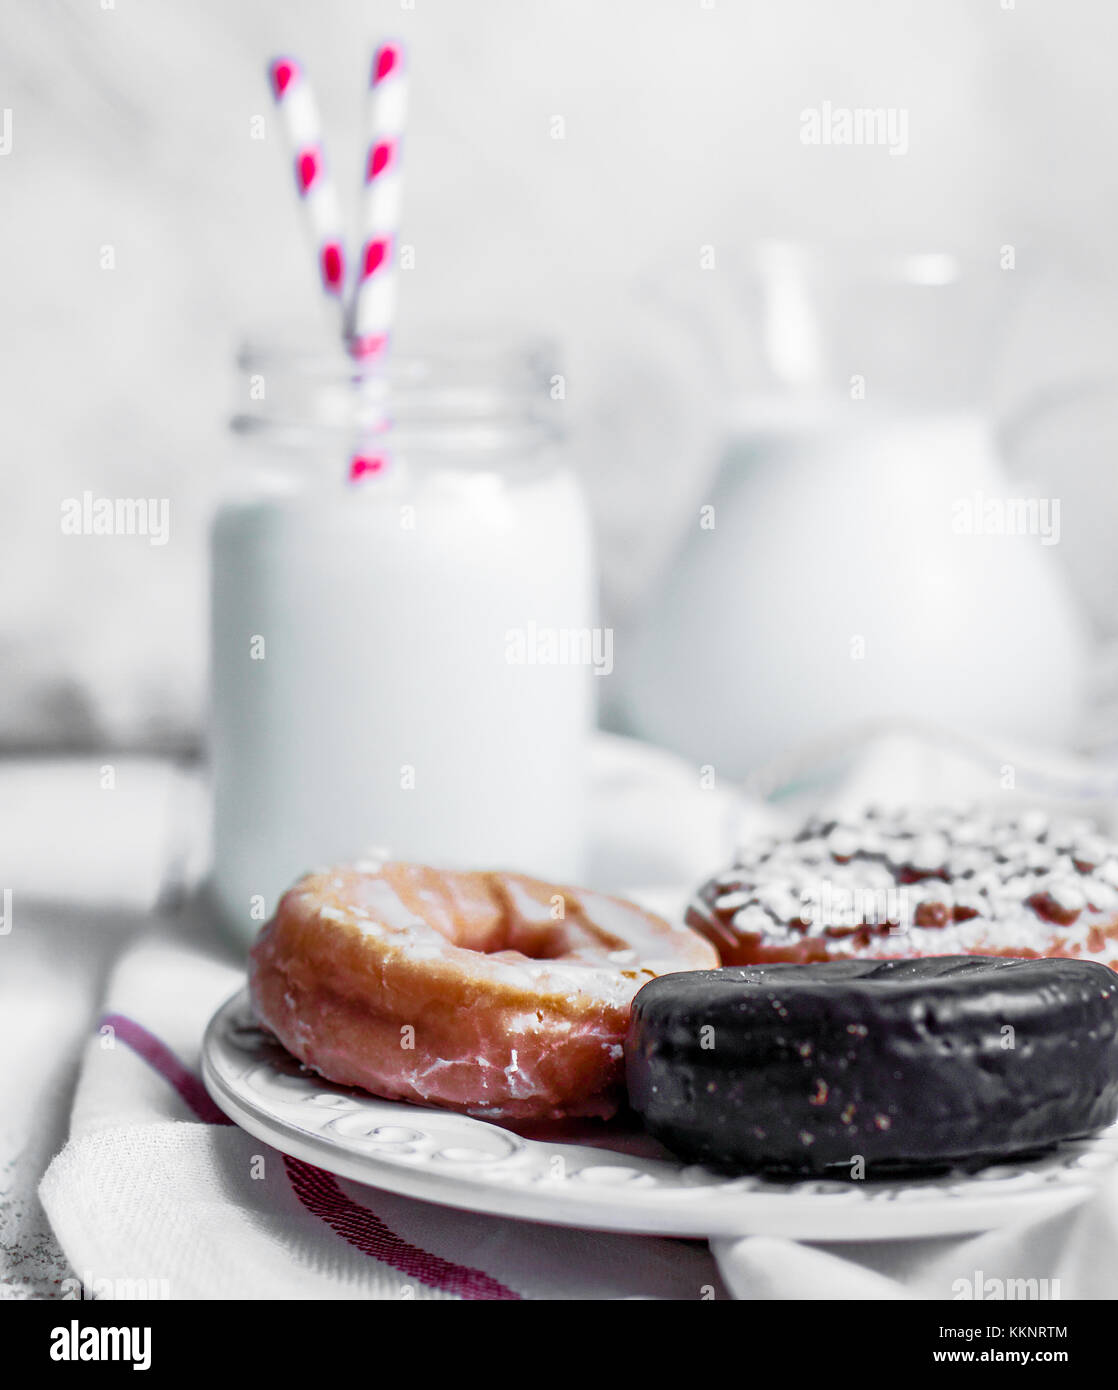 Milk And Assorted Donuts On Rustic Wooden Background Stock Photo